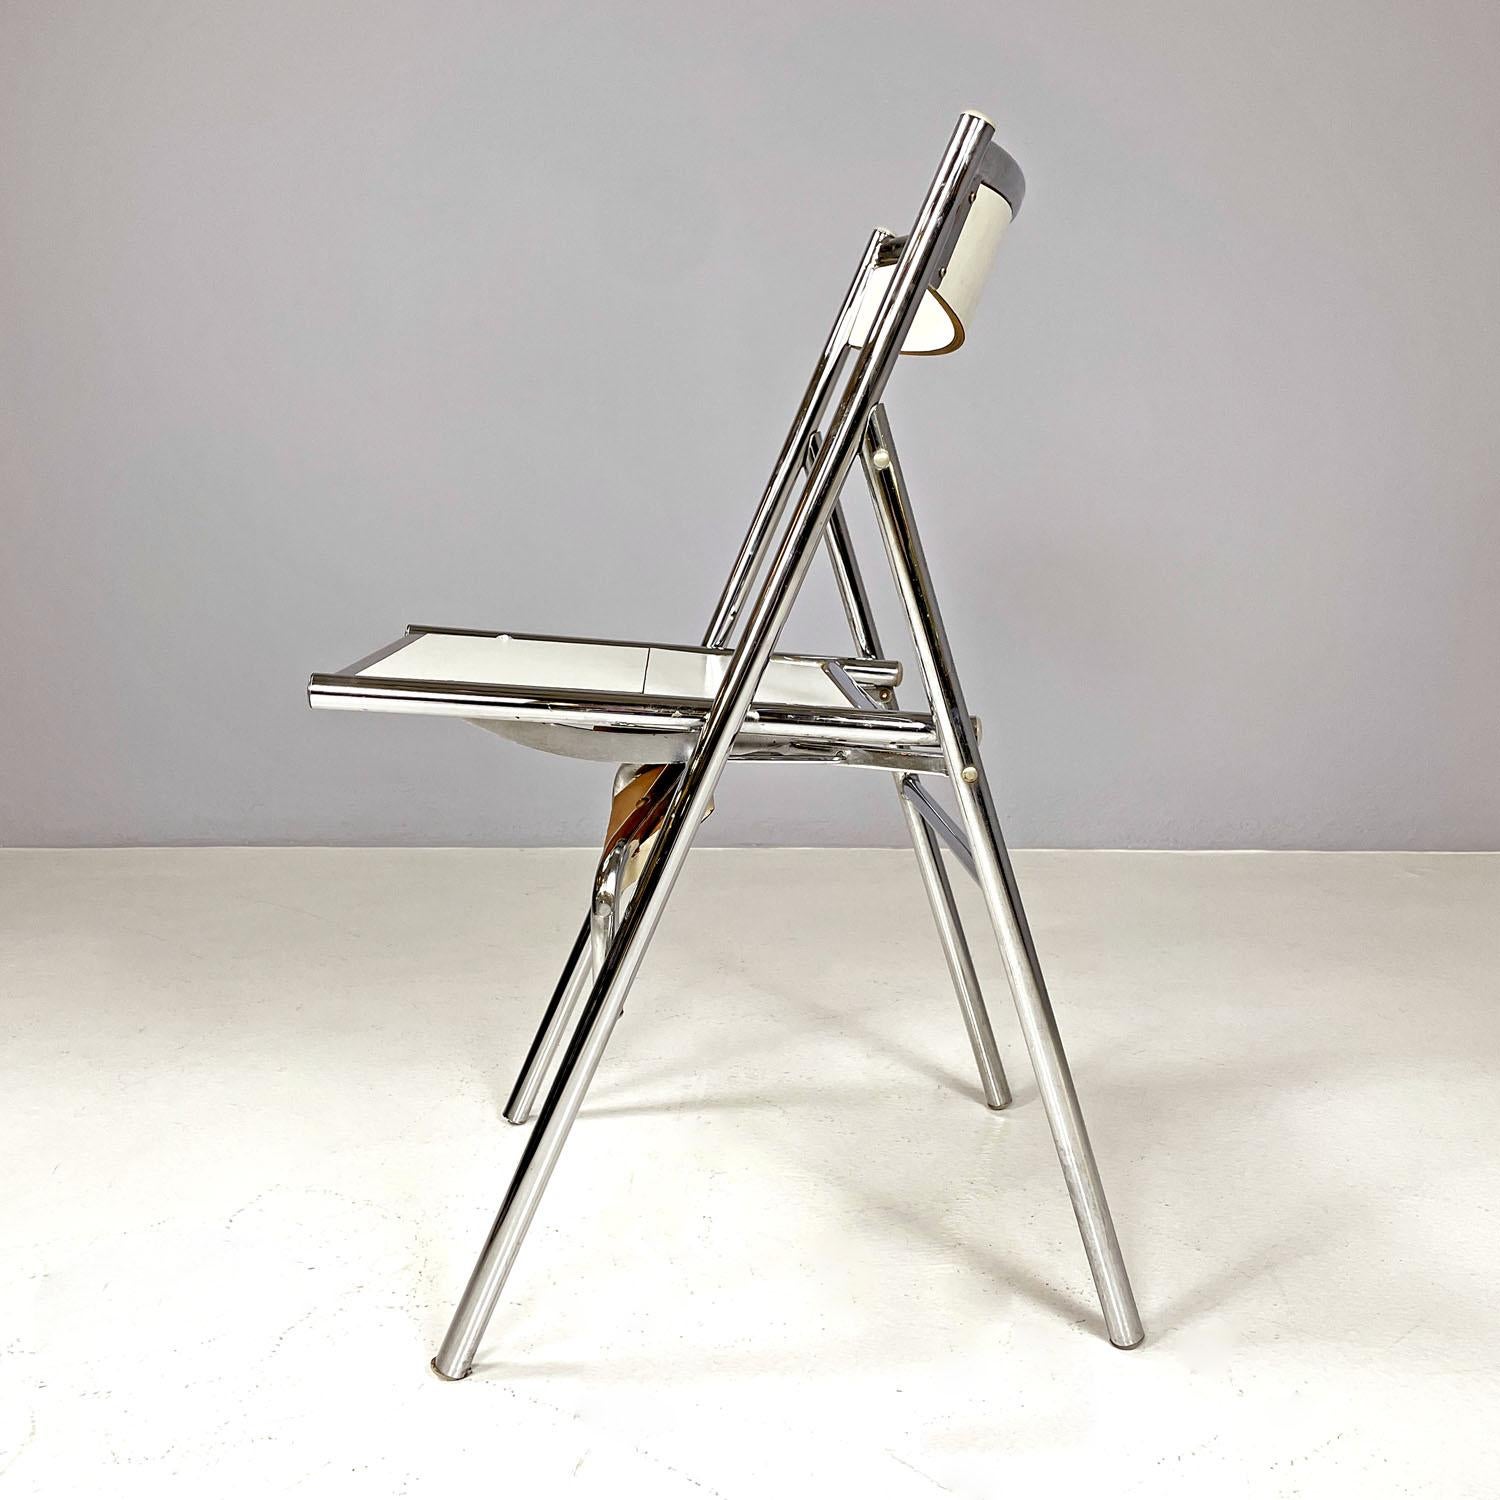 Metal Italian modern steel and white laminate chair convertible into a ladder, 1970s